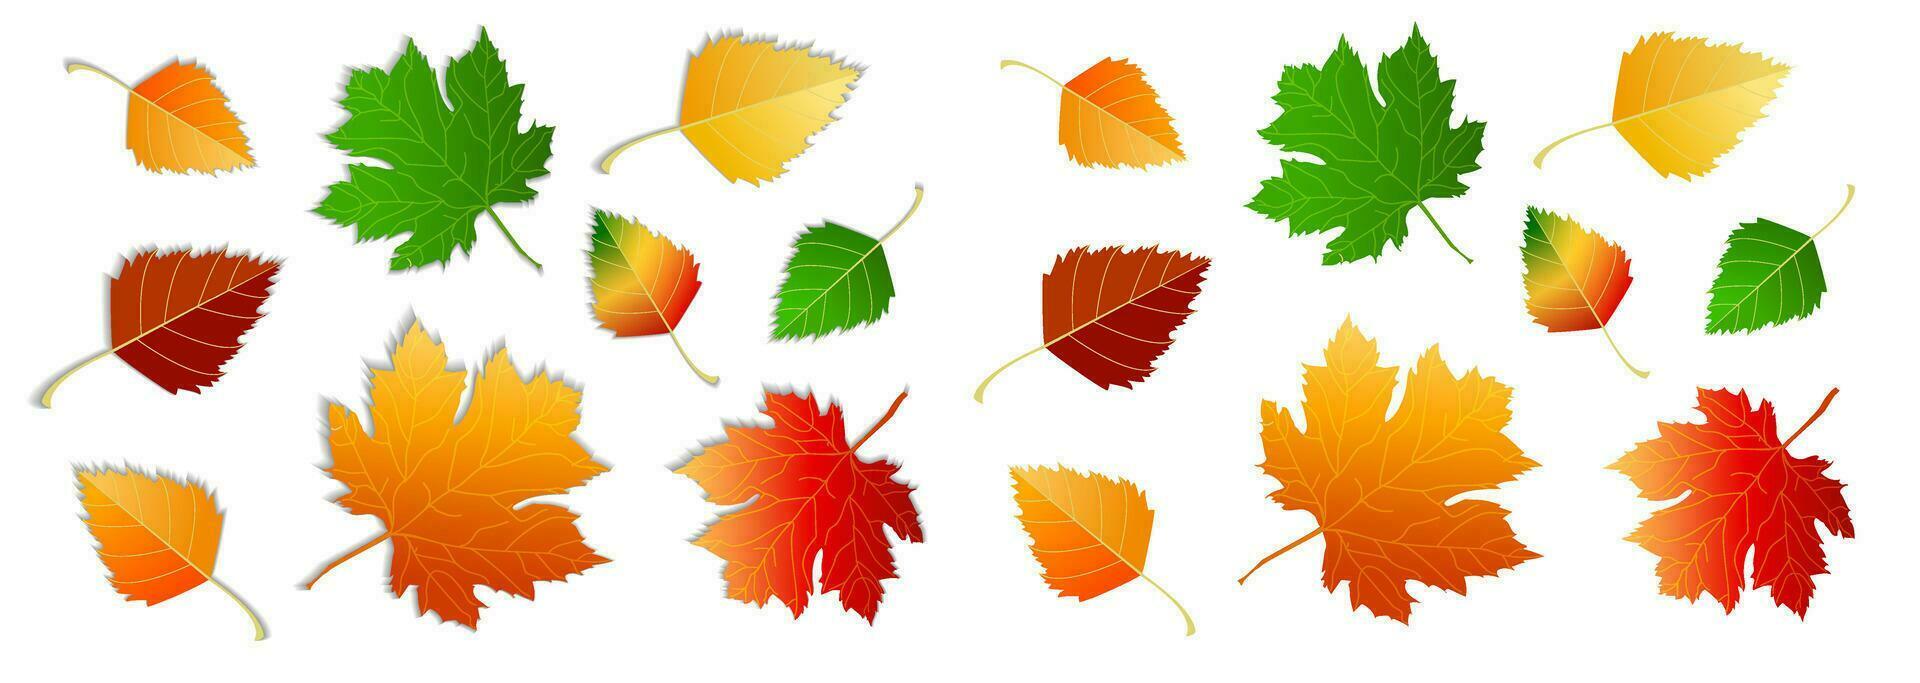 Set of autumn leaves, different colors on white background, with shadow and no shadow. Concept - autumn, autumn mood. Isolated autumn elements for design. Maple leaves, birch leaves vector